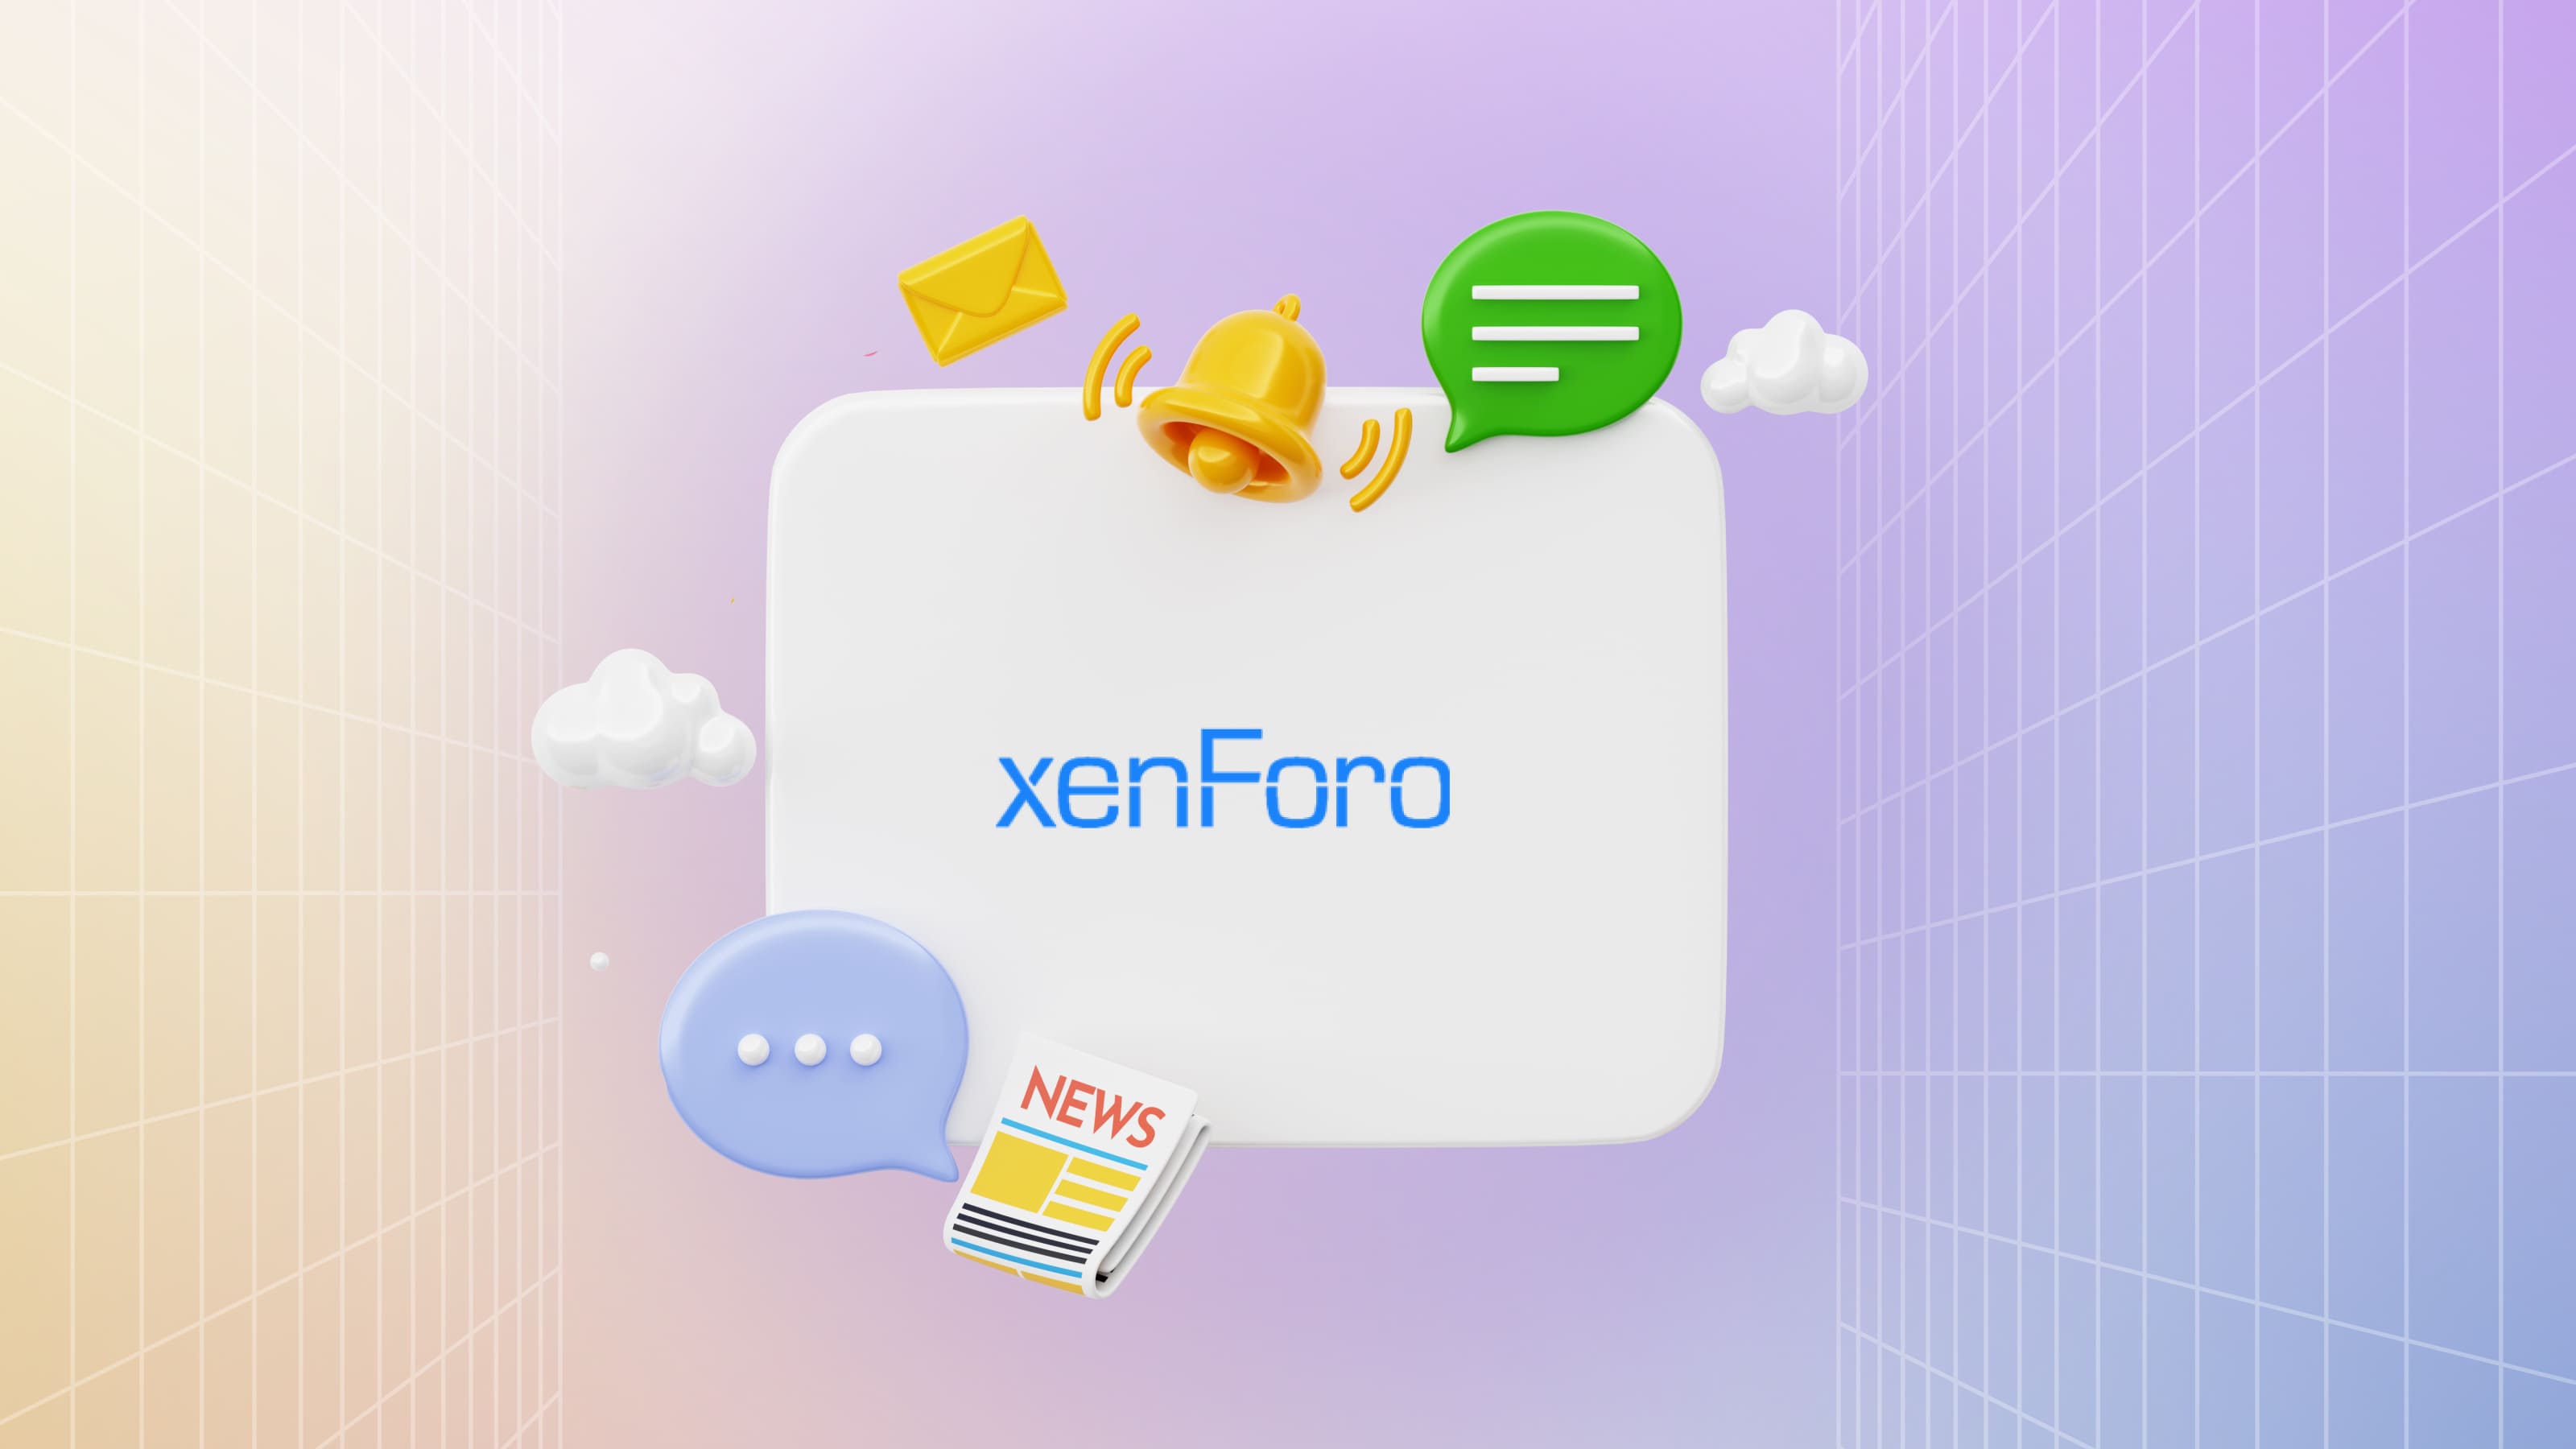 From moderation to SEO optimization, XenForo provides many features for running web forums.